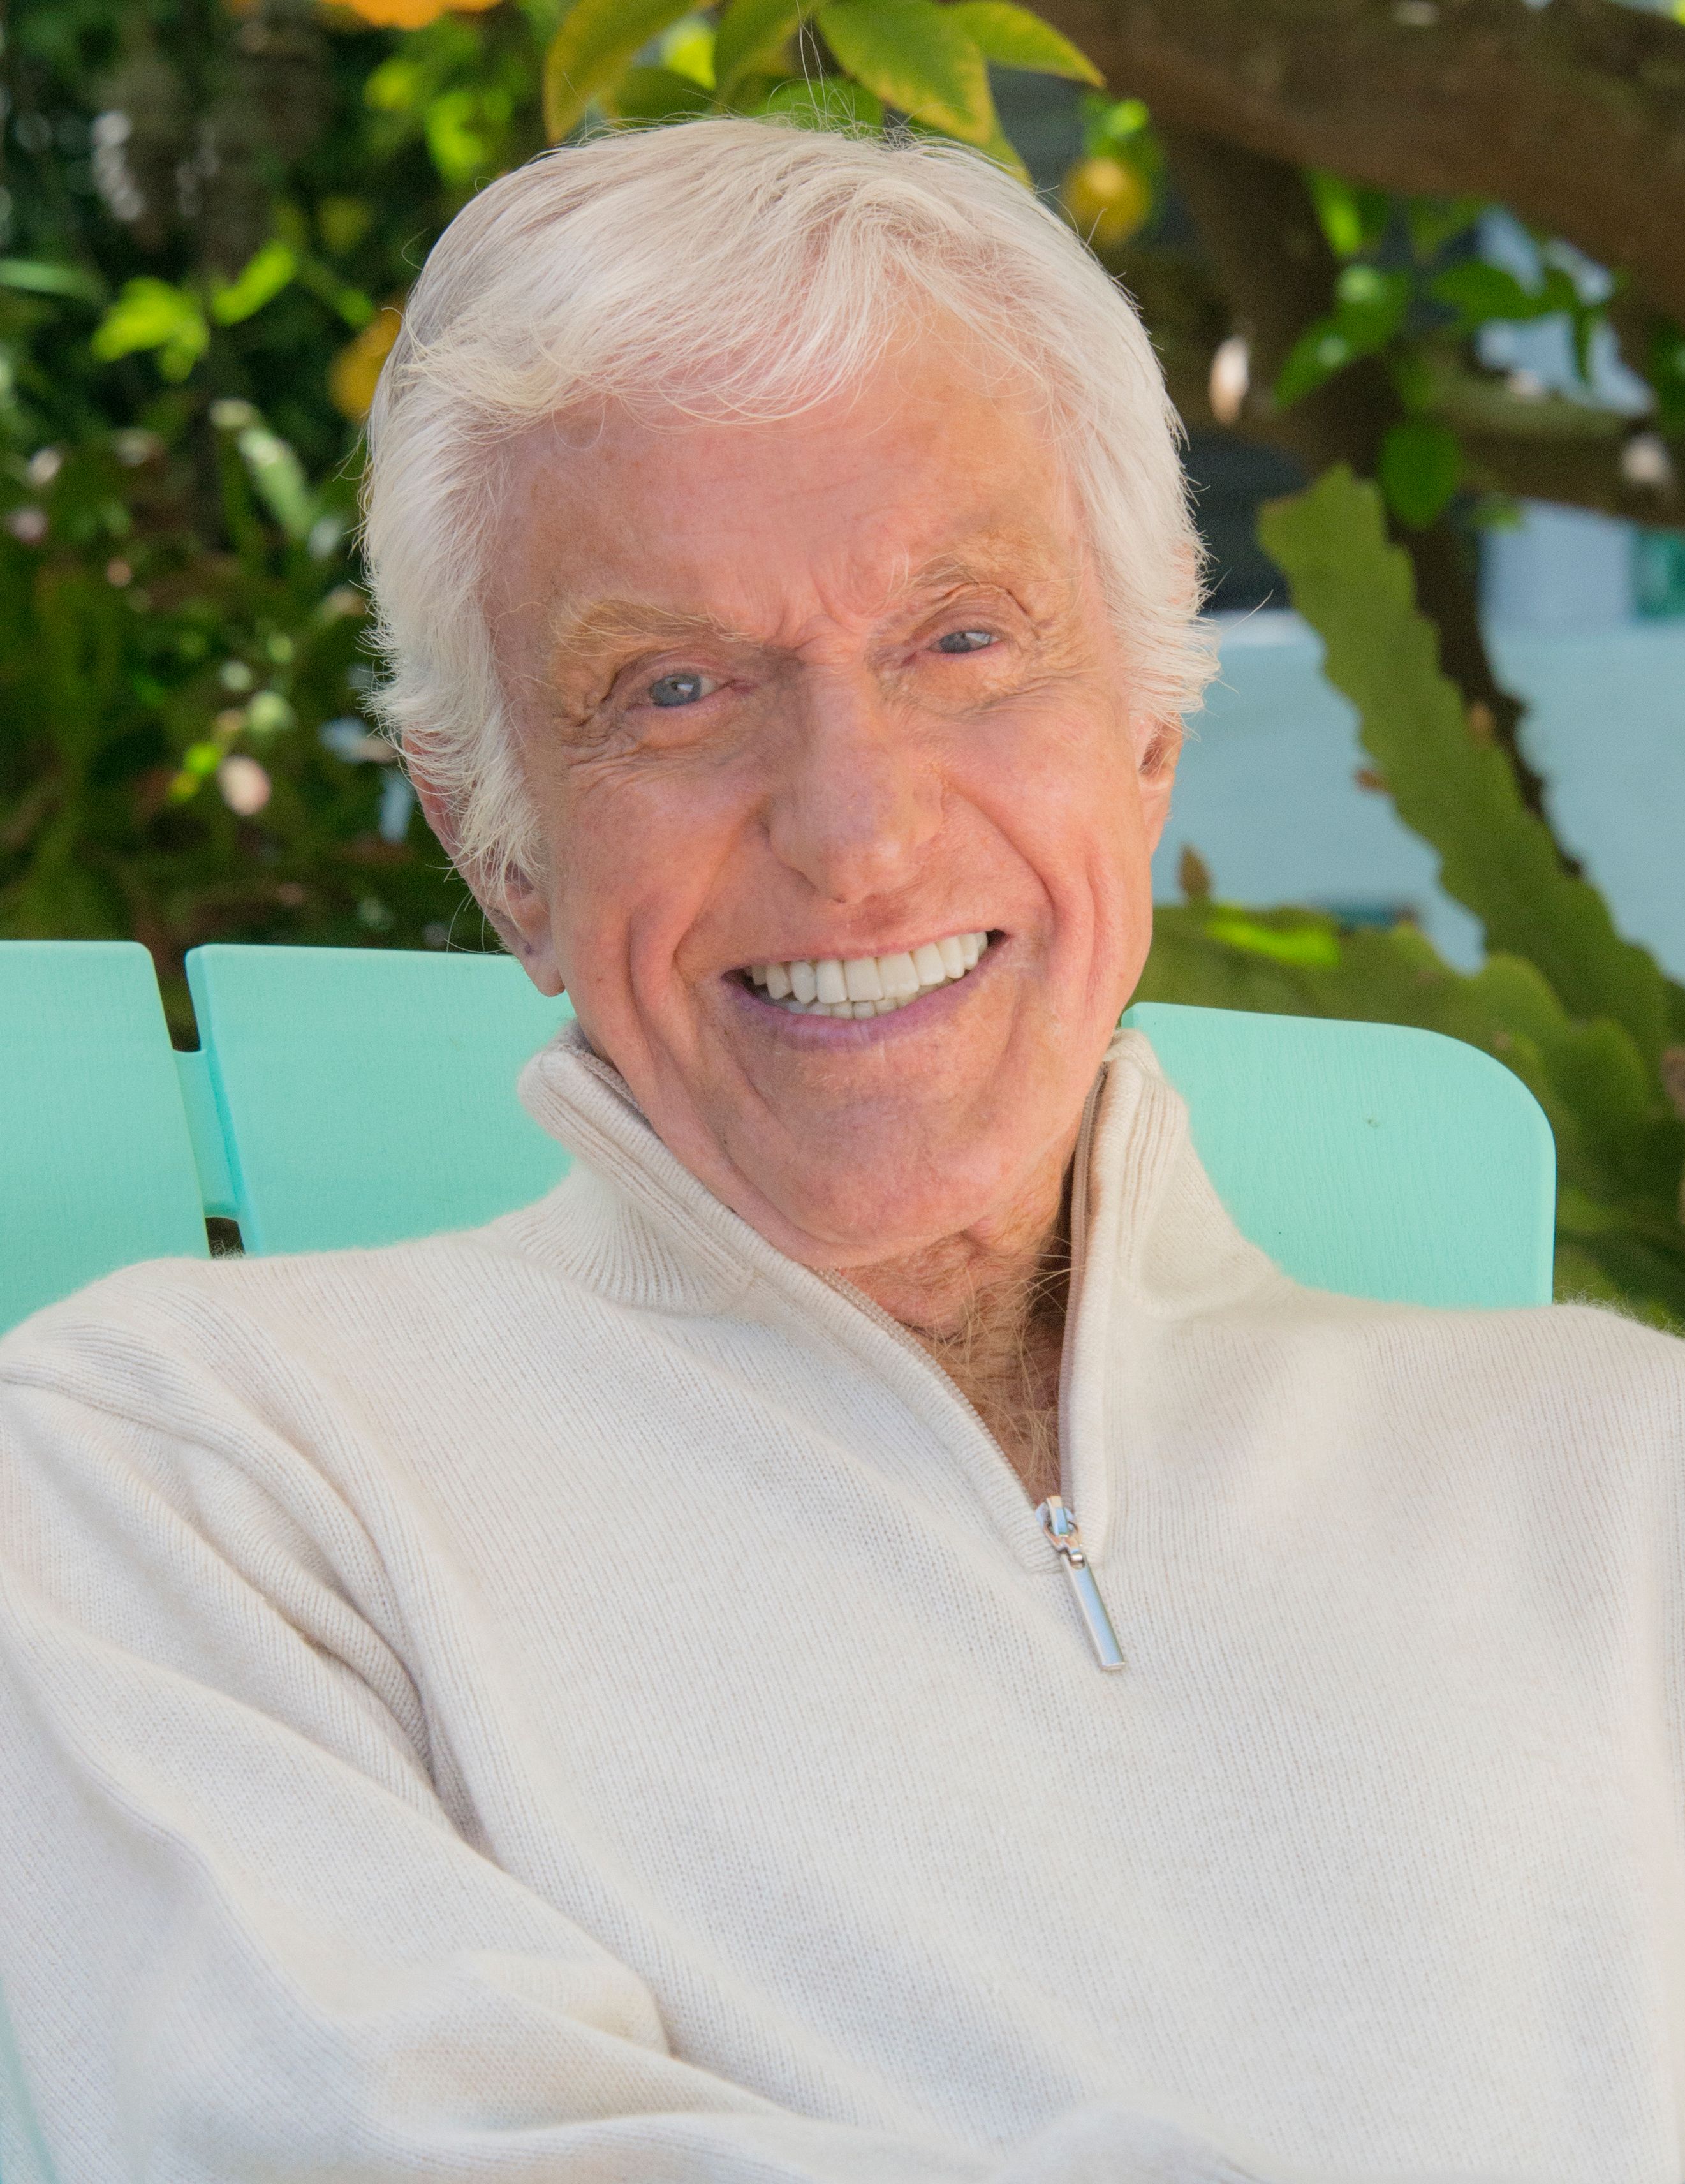 Dick Van Dyke at home during a photo shoot on April 21, 2016, in Malibu, California. | Source: Roxanne McCann/Getty Images